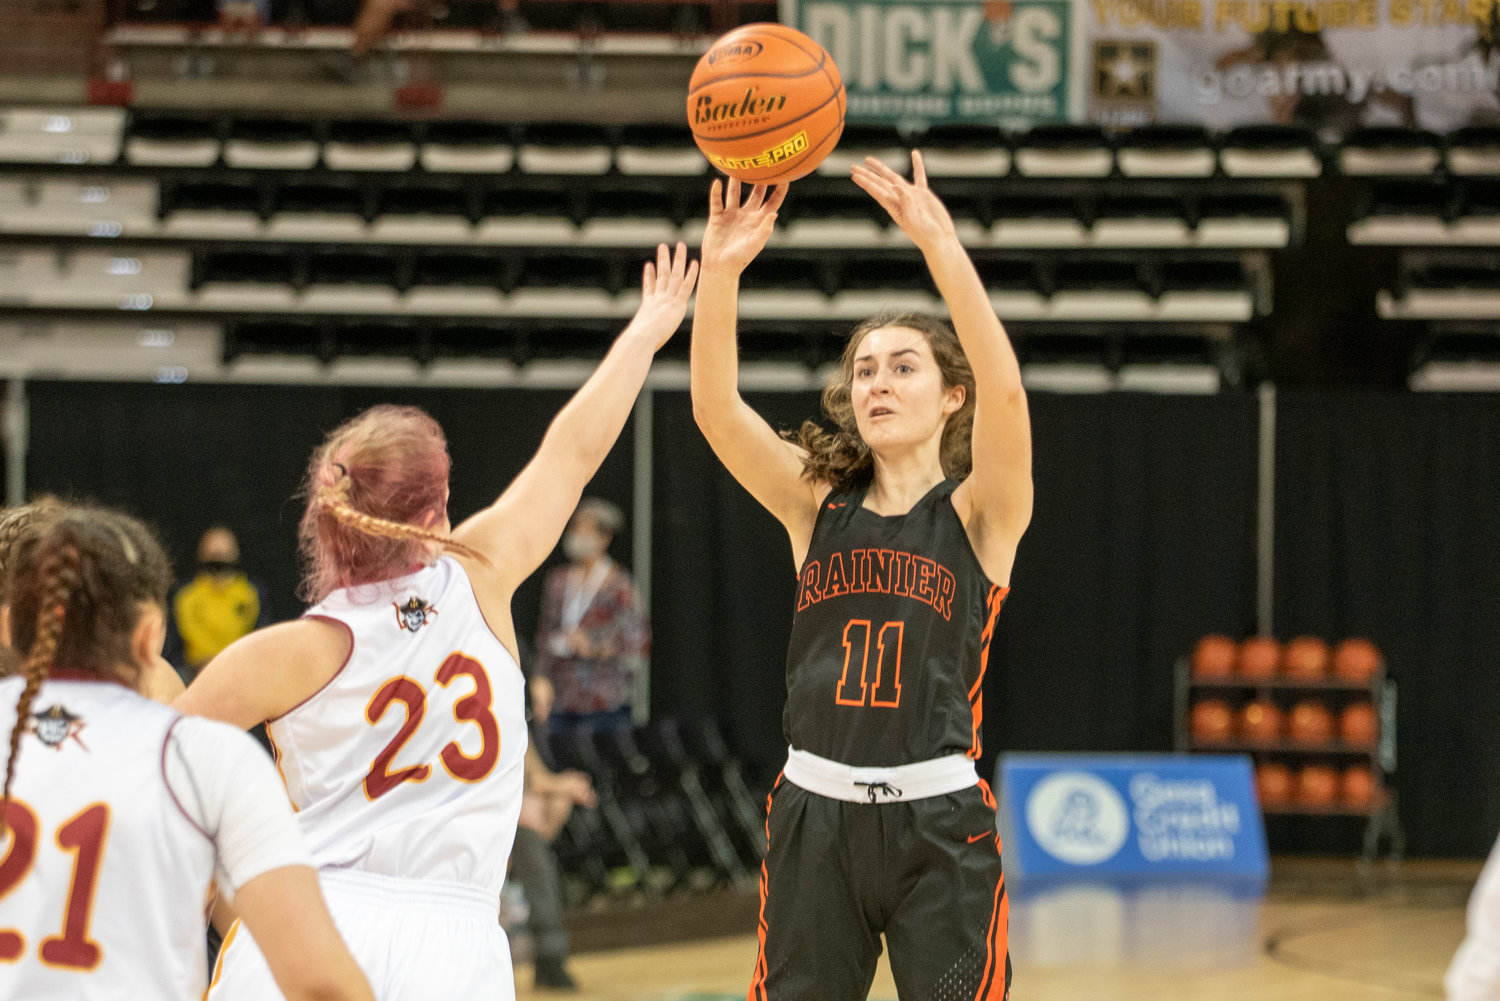 Rainier senior Faith Boesch (11) shoots a 3-pointer during the opening round of the 2B state tournament against Lake Roosevelt on Wednesday at the Spokane Arena.